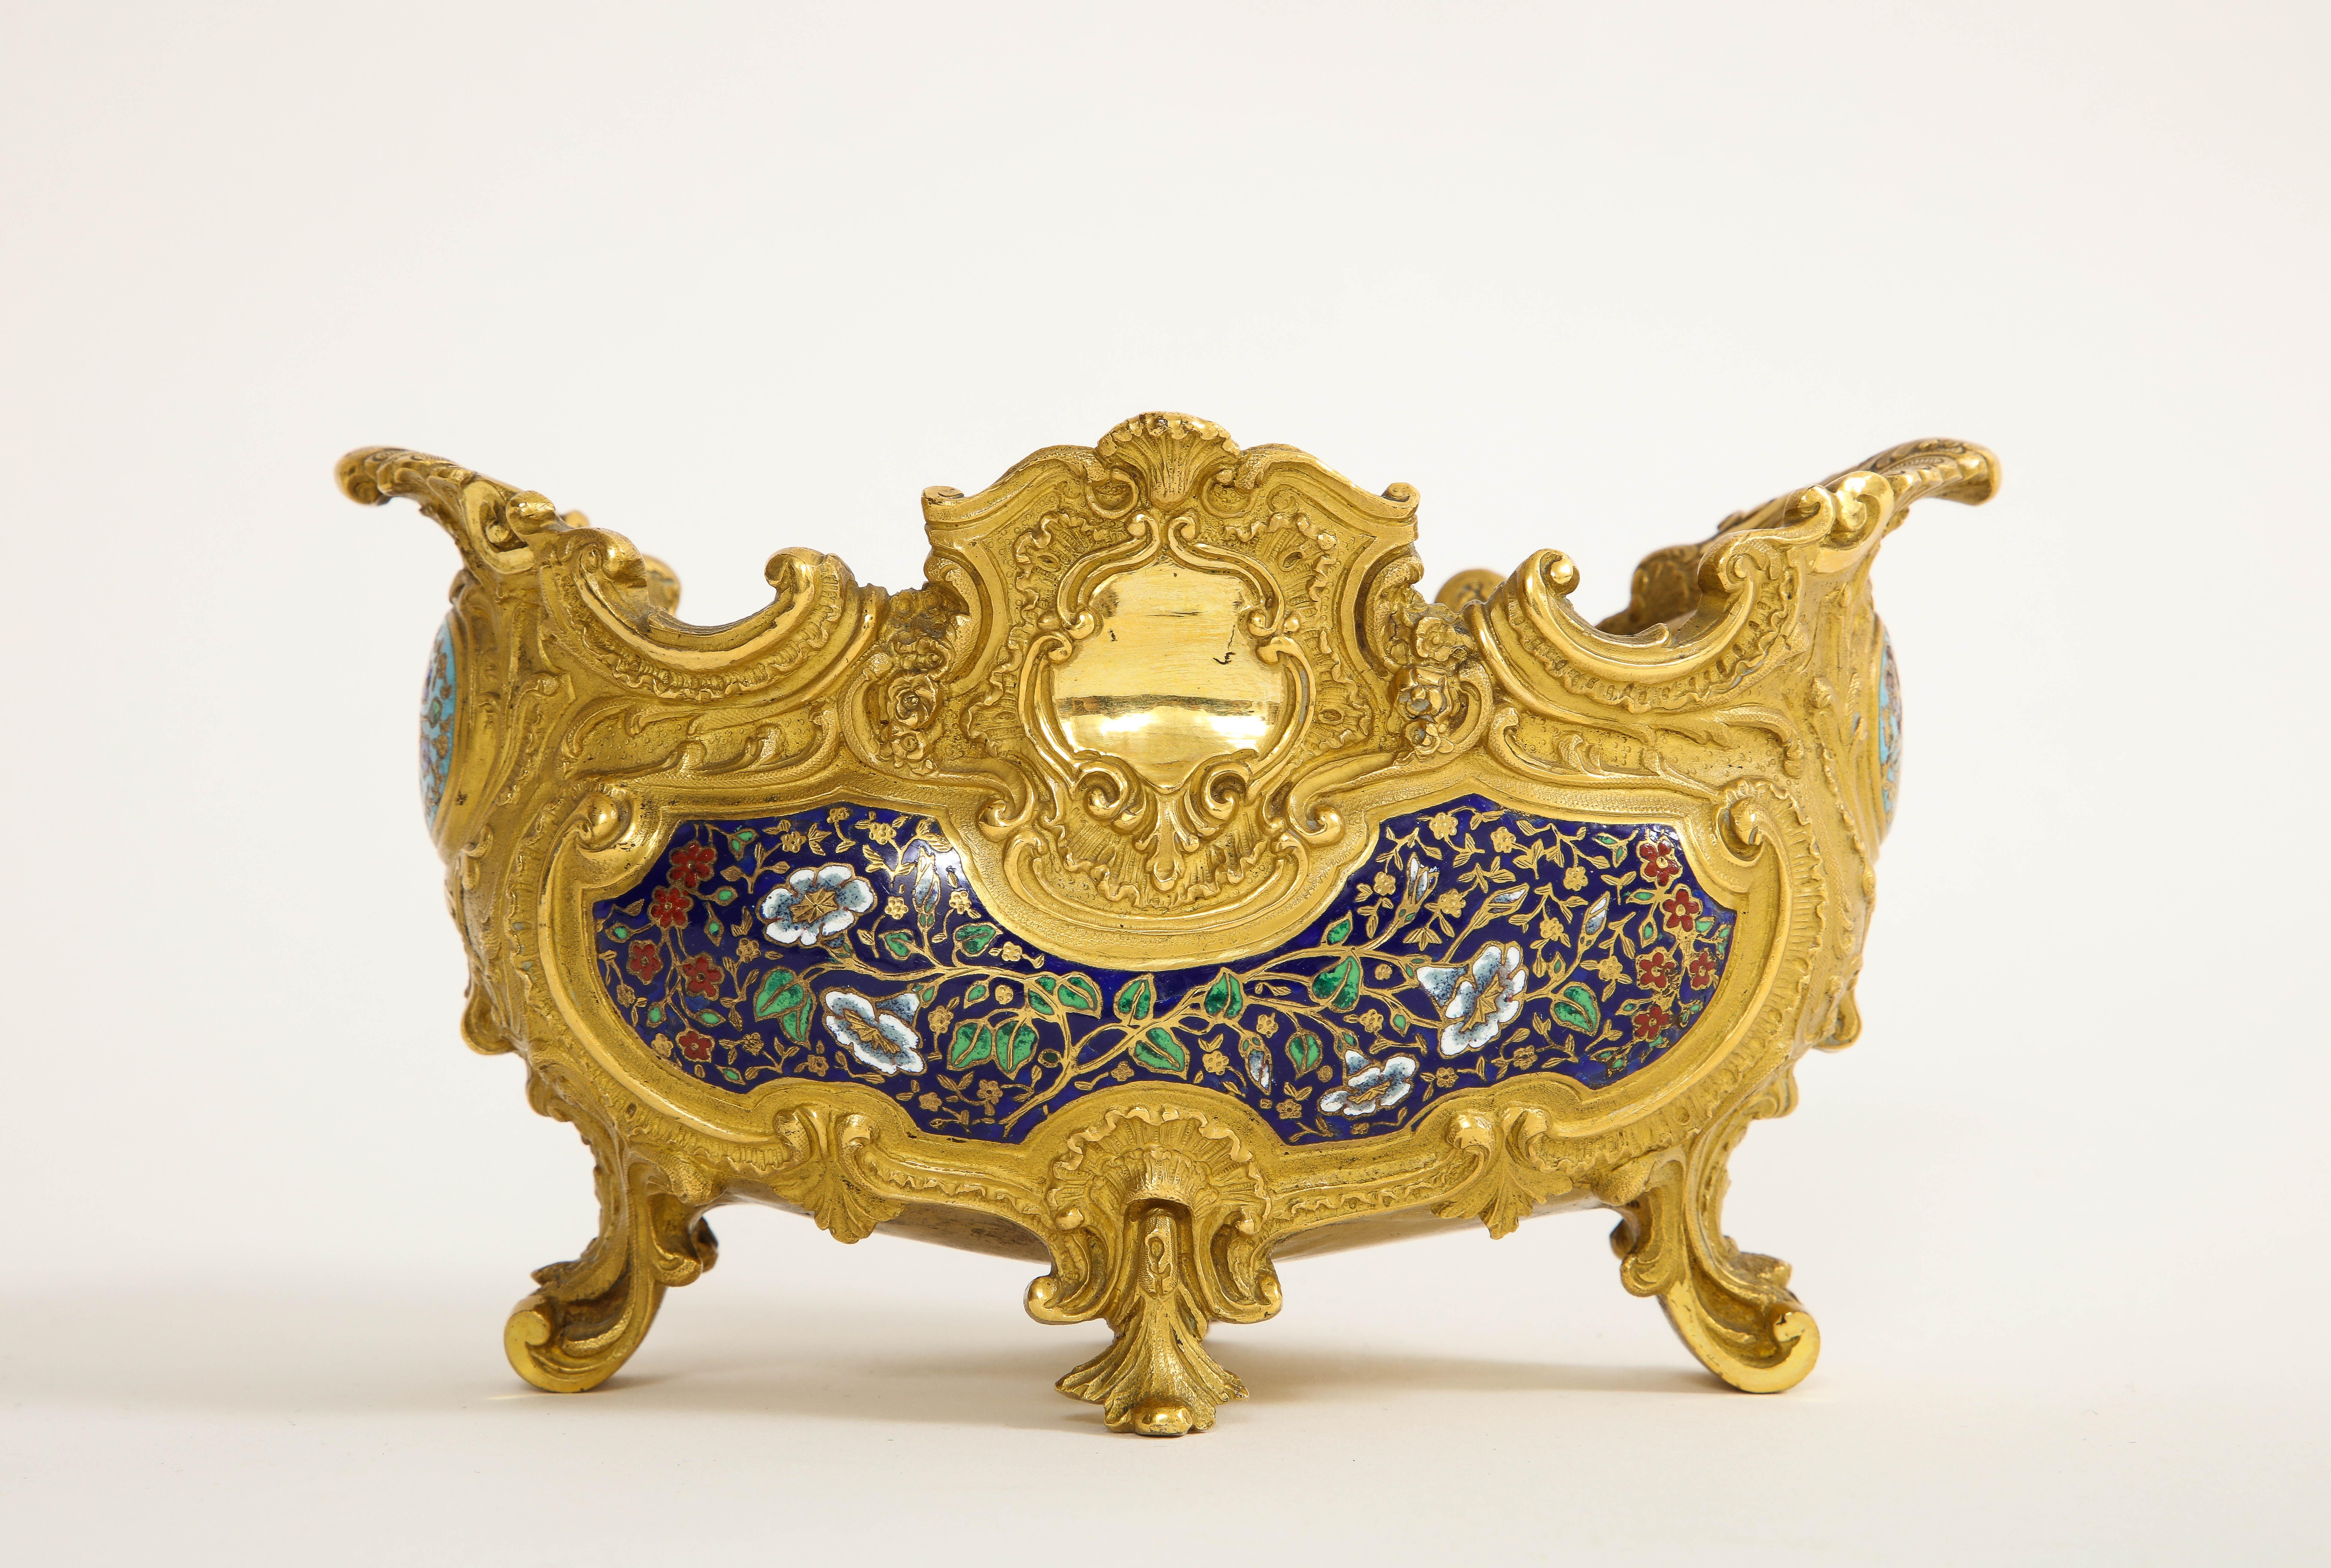 A 19th C. French Ormolu Champlevé Enamel Footed Centerpiece, Att. Barbedienne For Sale 5